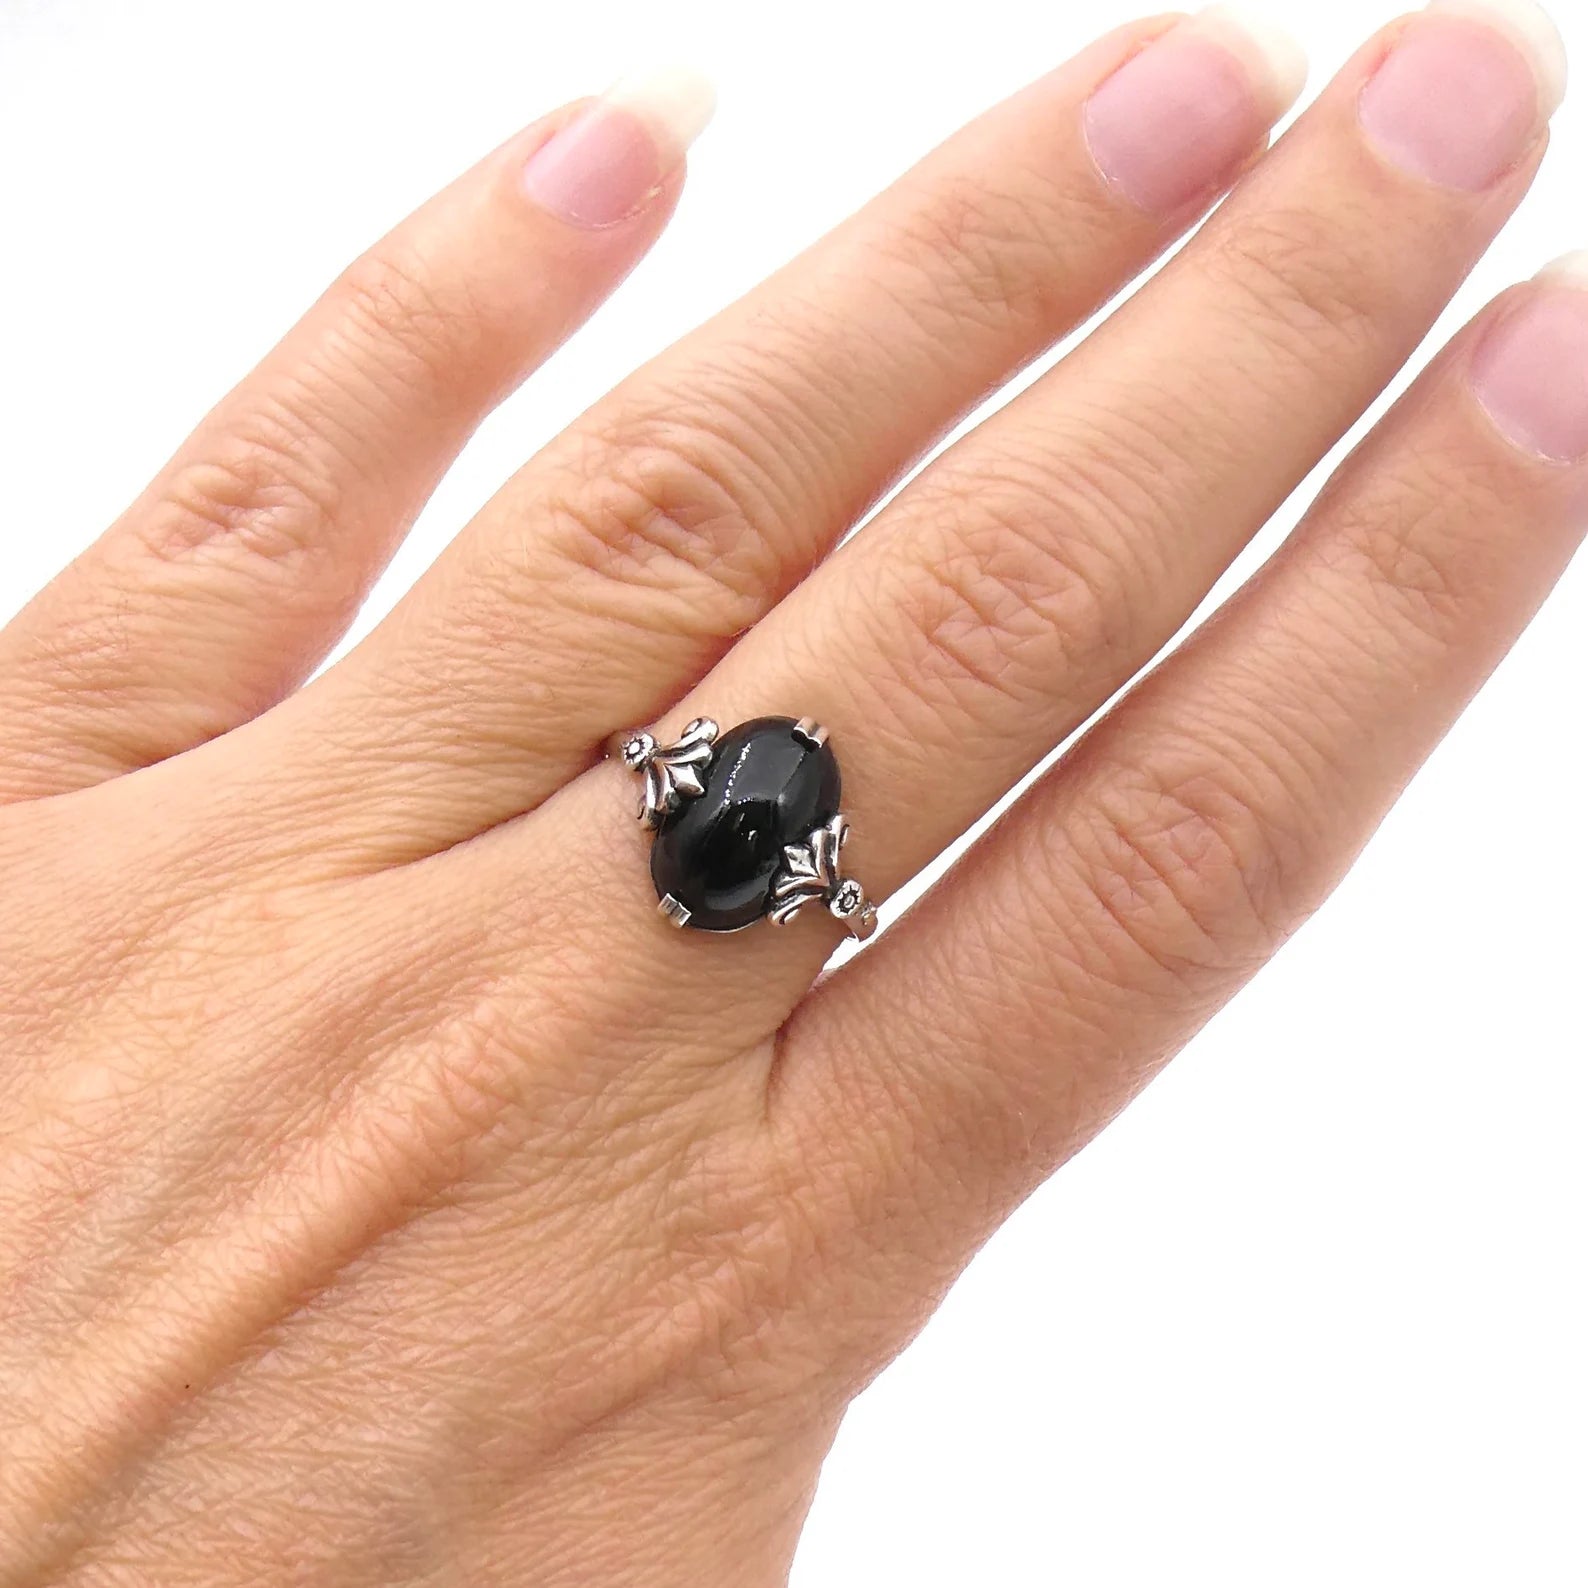 Antique style onyx and silver ring, with a scrolled silver setting. - Collected